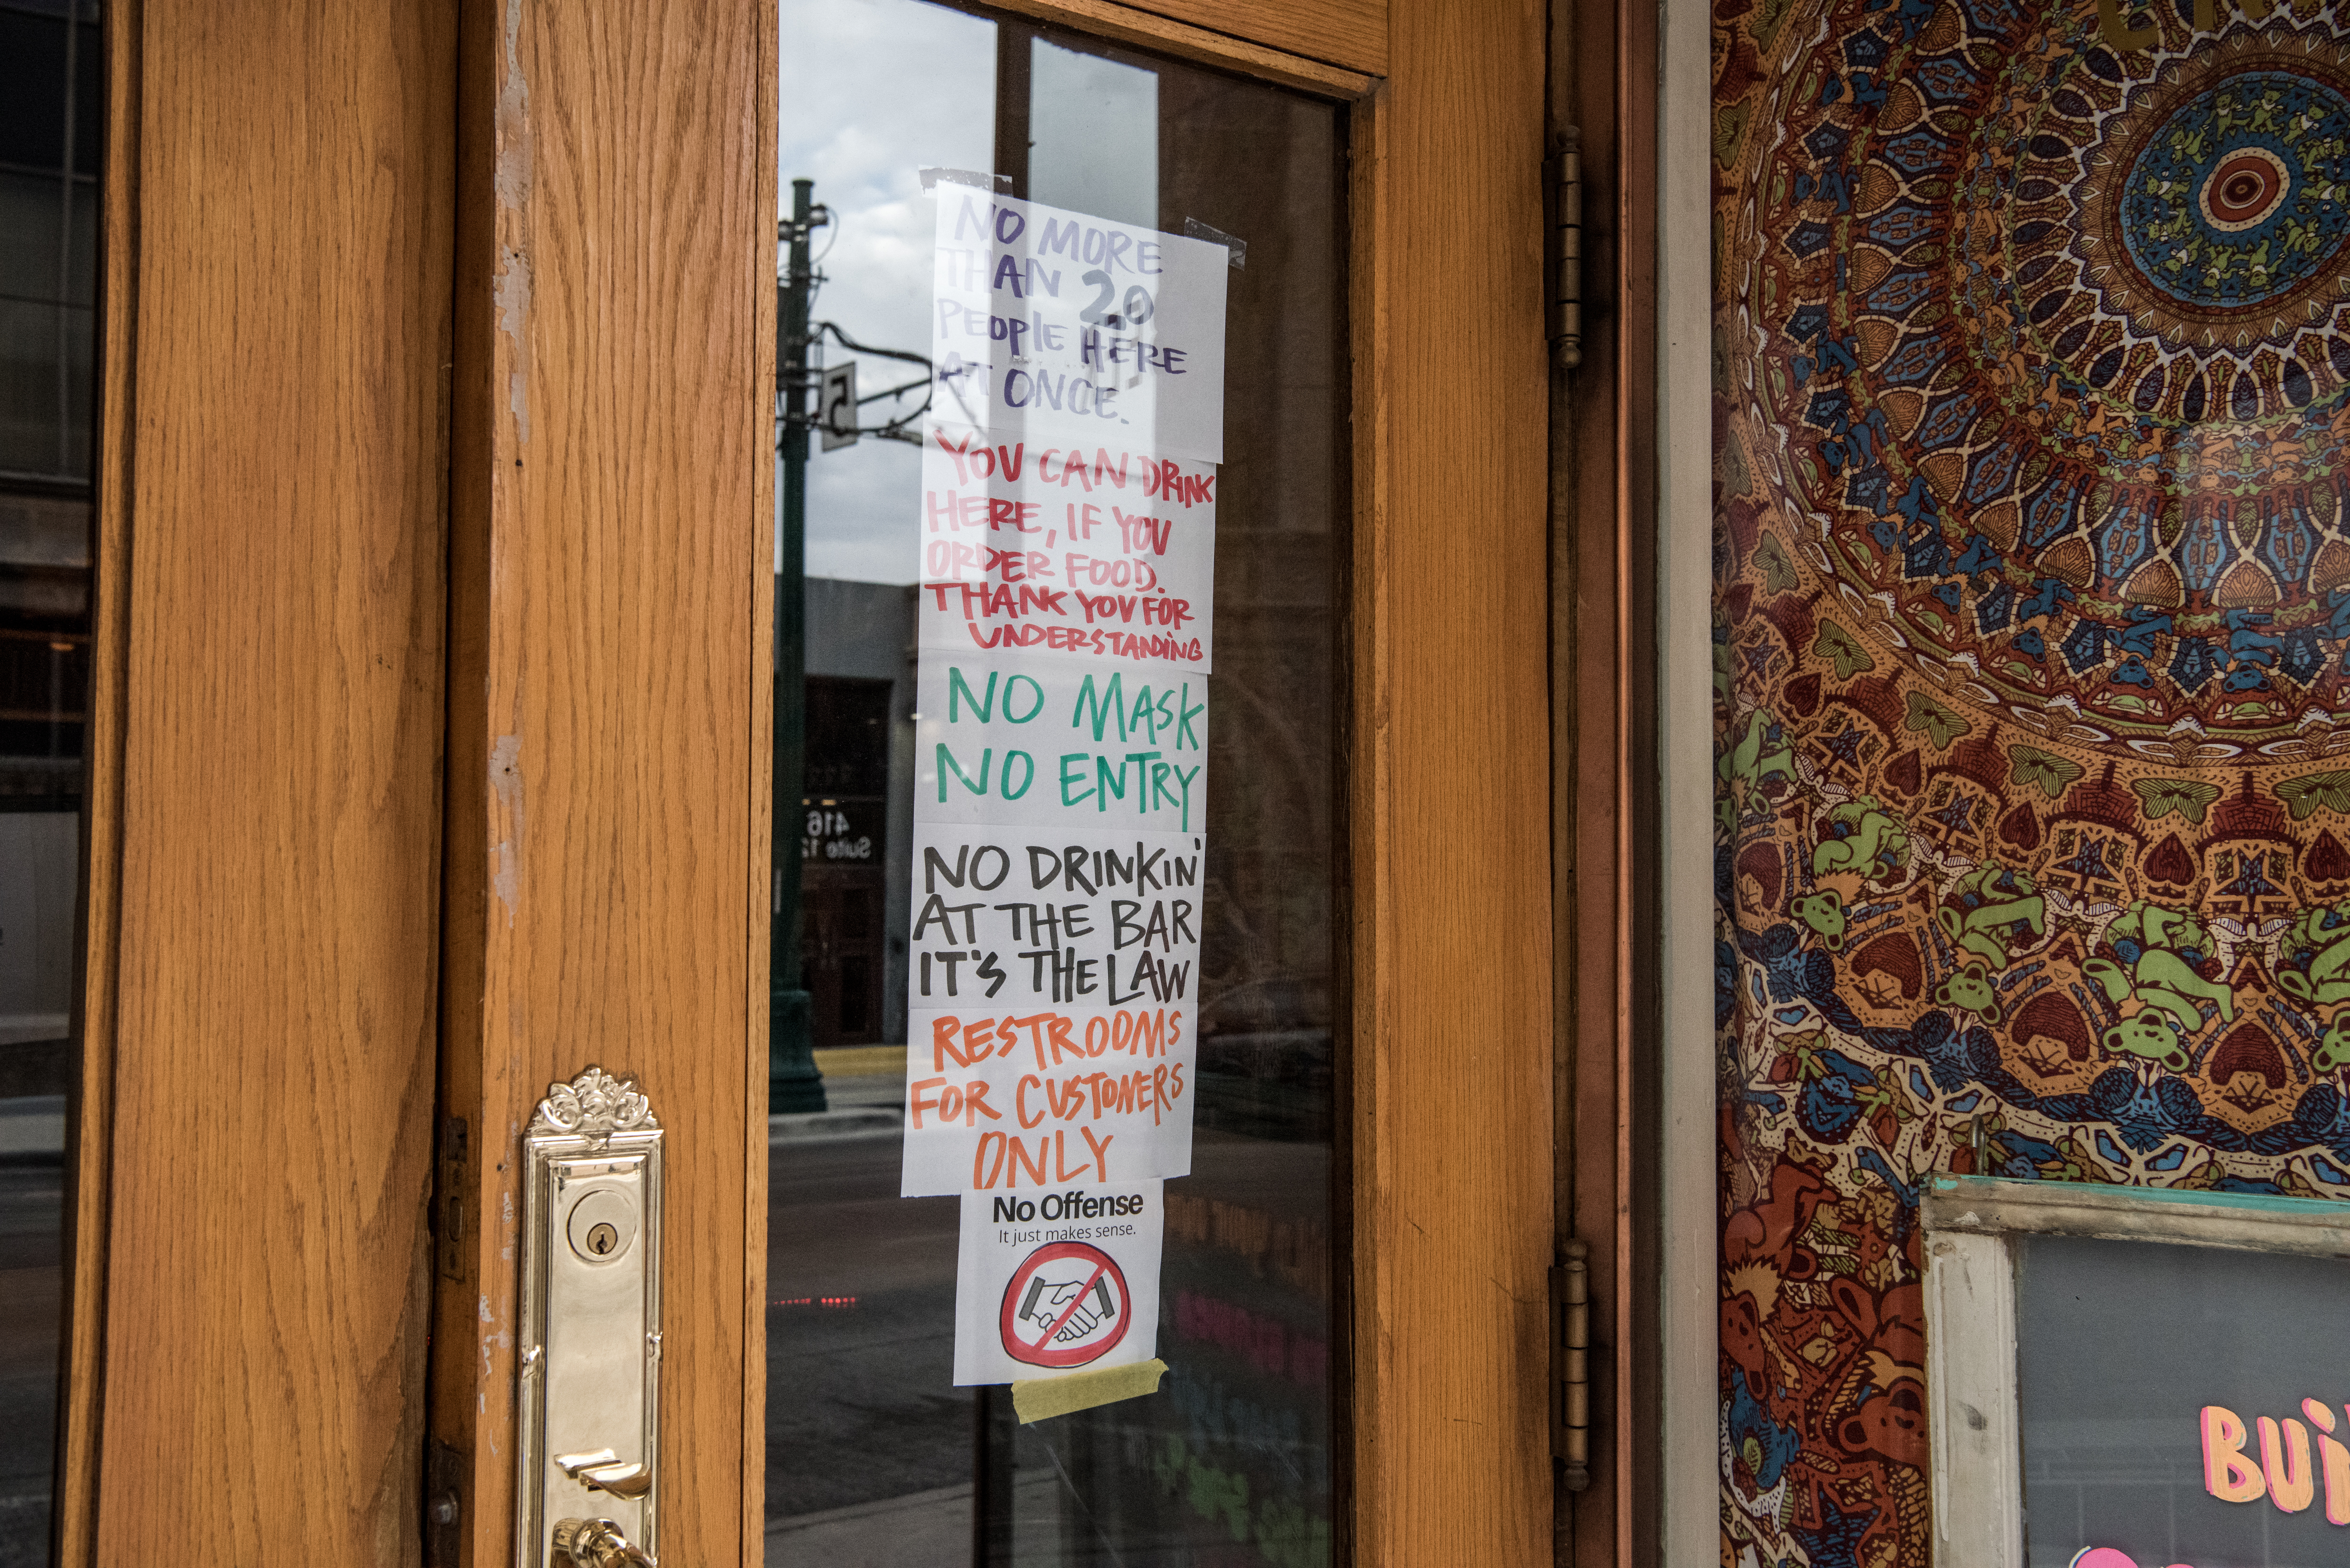 EL PASO, TX - JULY 1: Signs are posted at the entrance to Craft and Social, a beer bar, on July 1, 2020 in El Paso, Texas. As coronavirus cases have surged in Texas, Gov. Greg Abbott has paused the state's reopening plan. (Photo by Cengiz Yar/Getty Images)